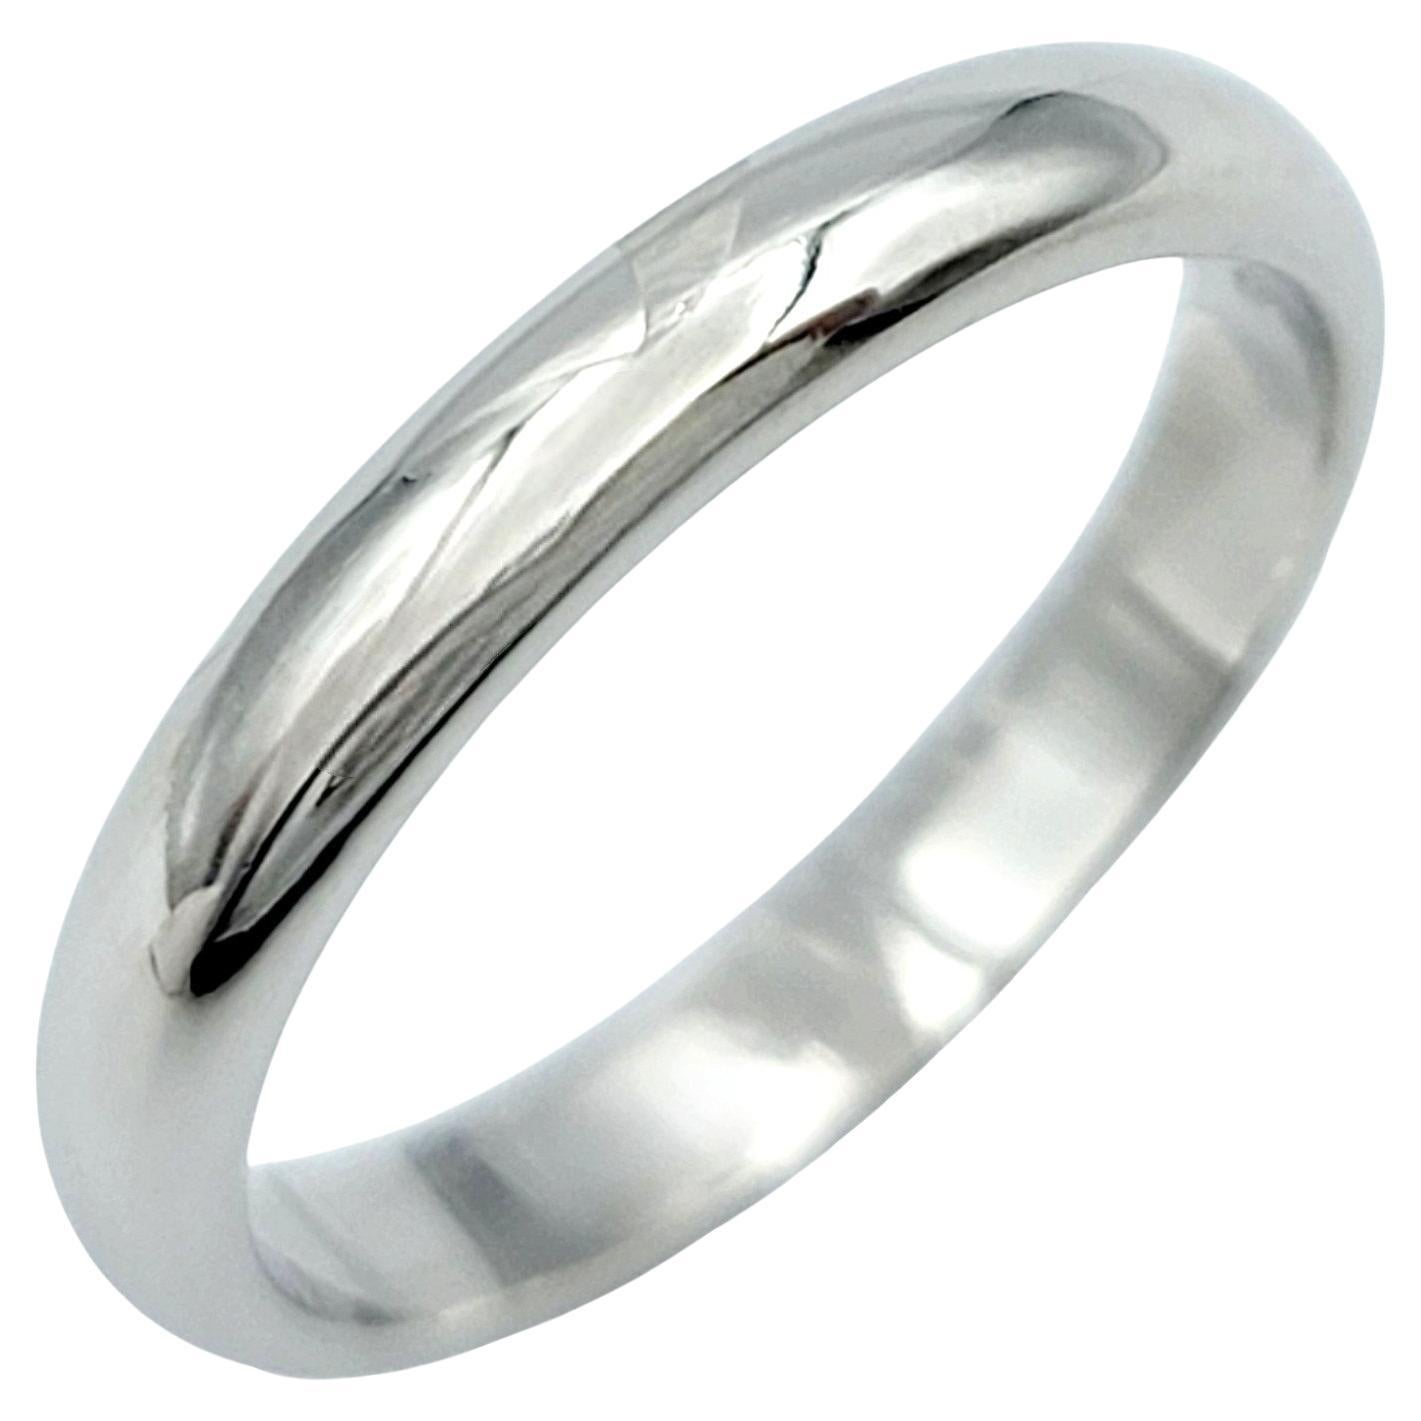 Tiffany & Co. Tiffany Forever Wedding Band Ring Set in Polished Platinum For Sale